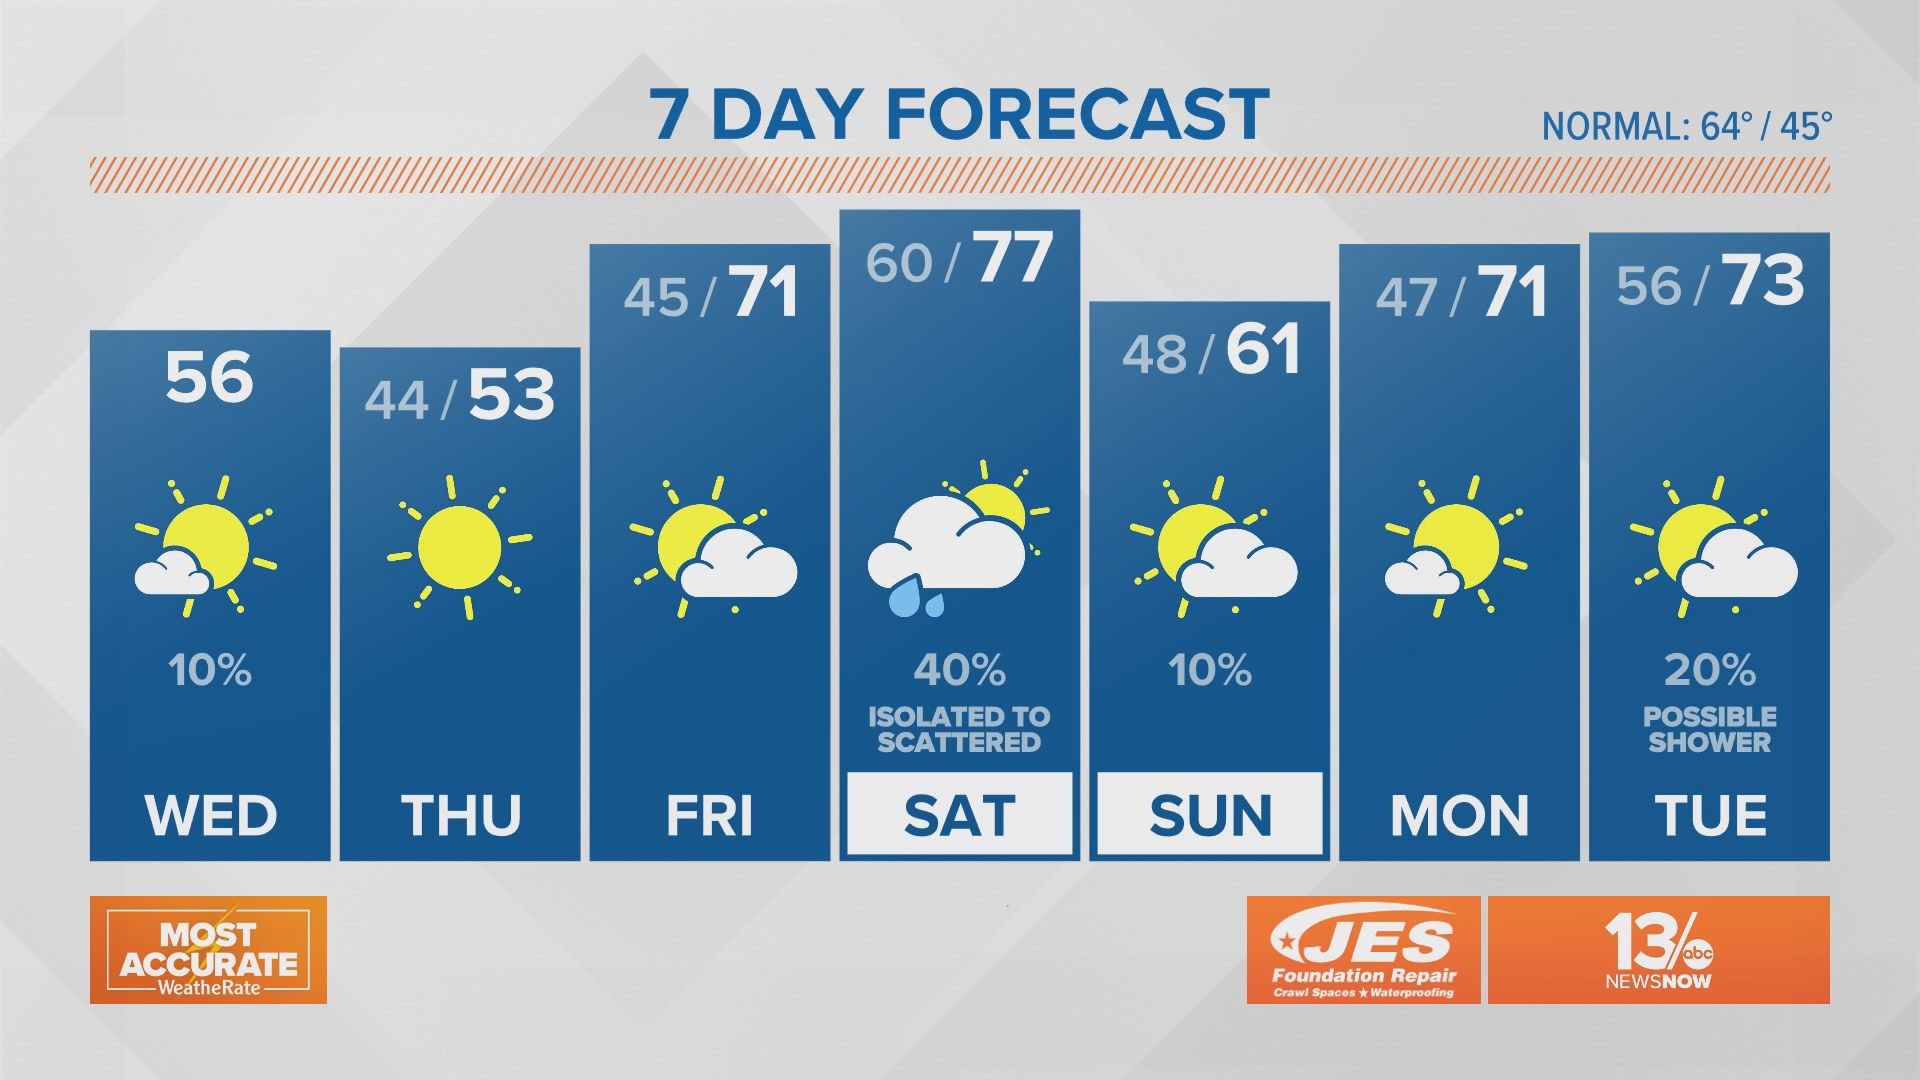 Cool Wednesday and Thursday, with warmer temperatures heading into the weekend.